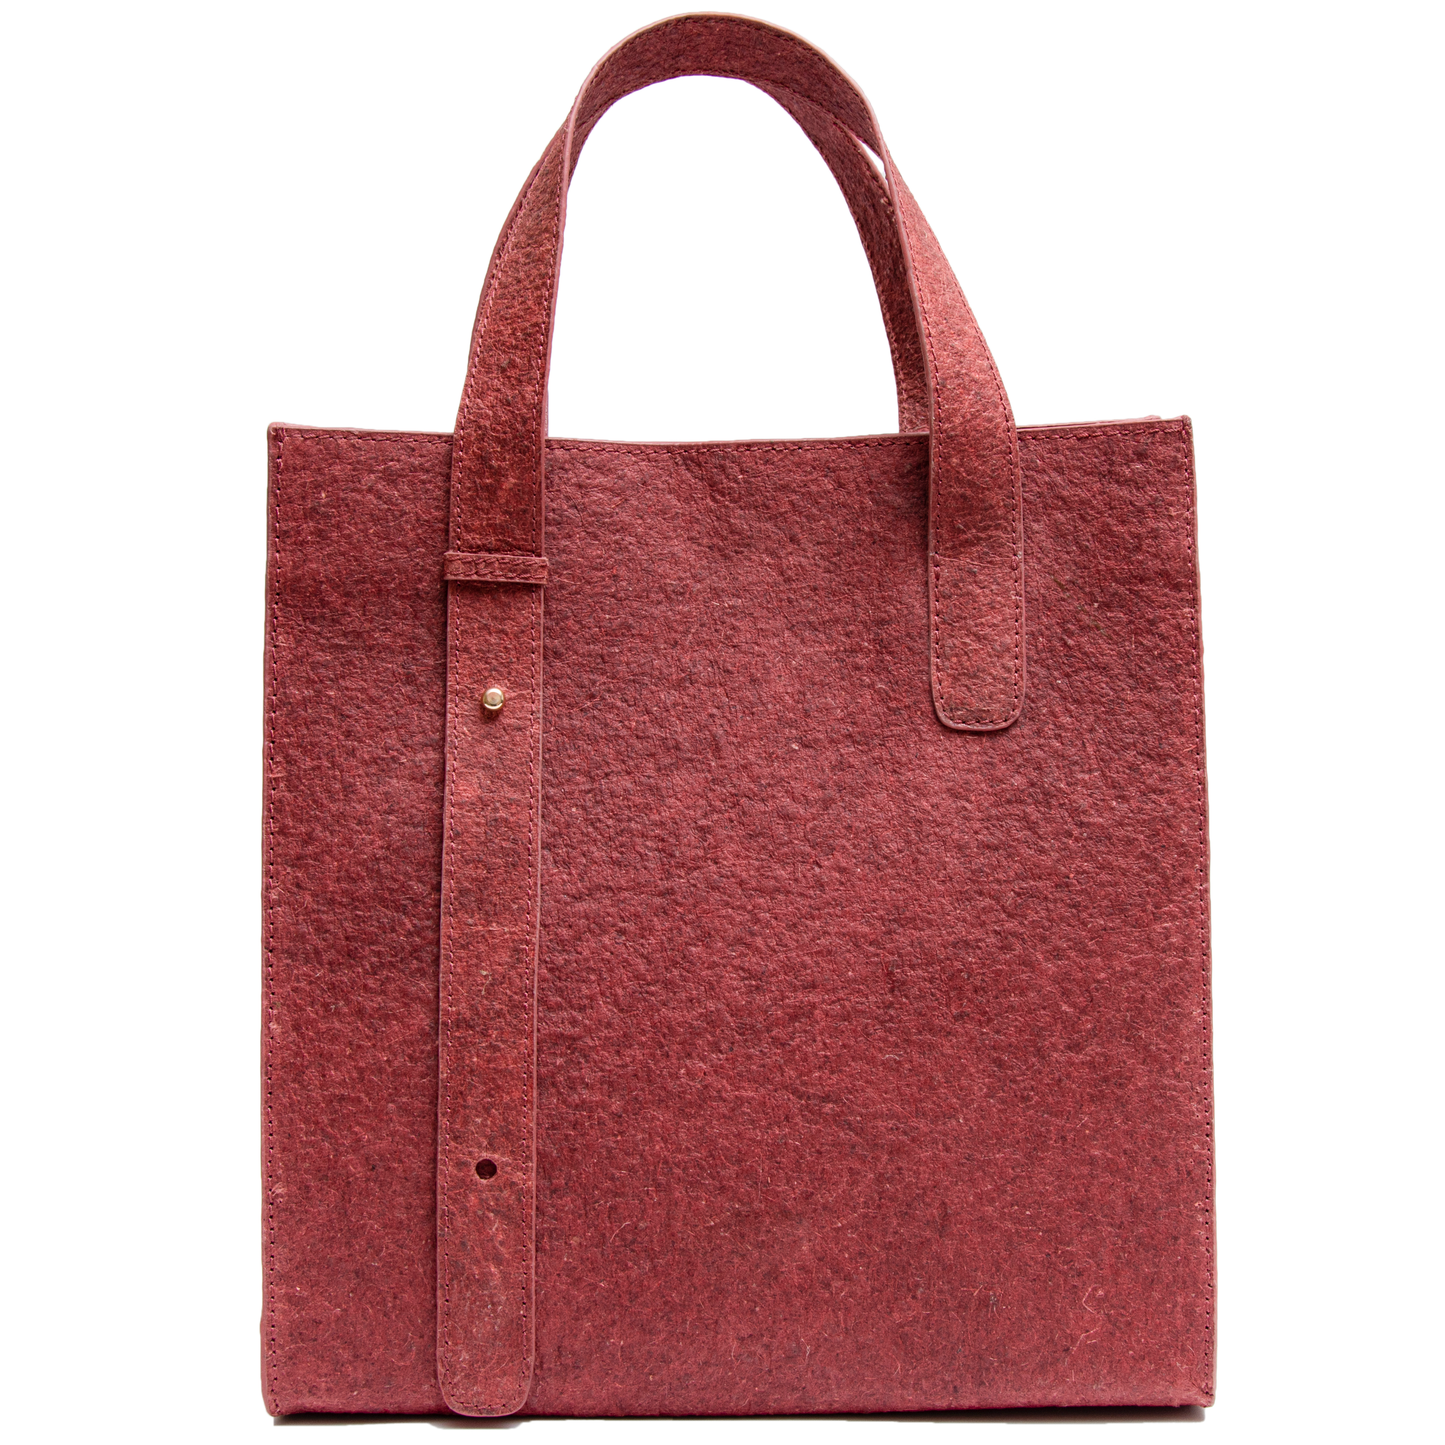  luxury hand bag, made with environment friendly, cruelty free vegan material, making it a sustainable shoppers' bag and an ideal luxury gift